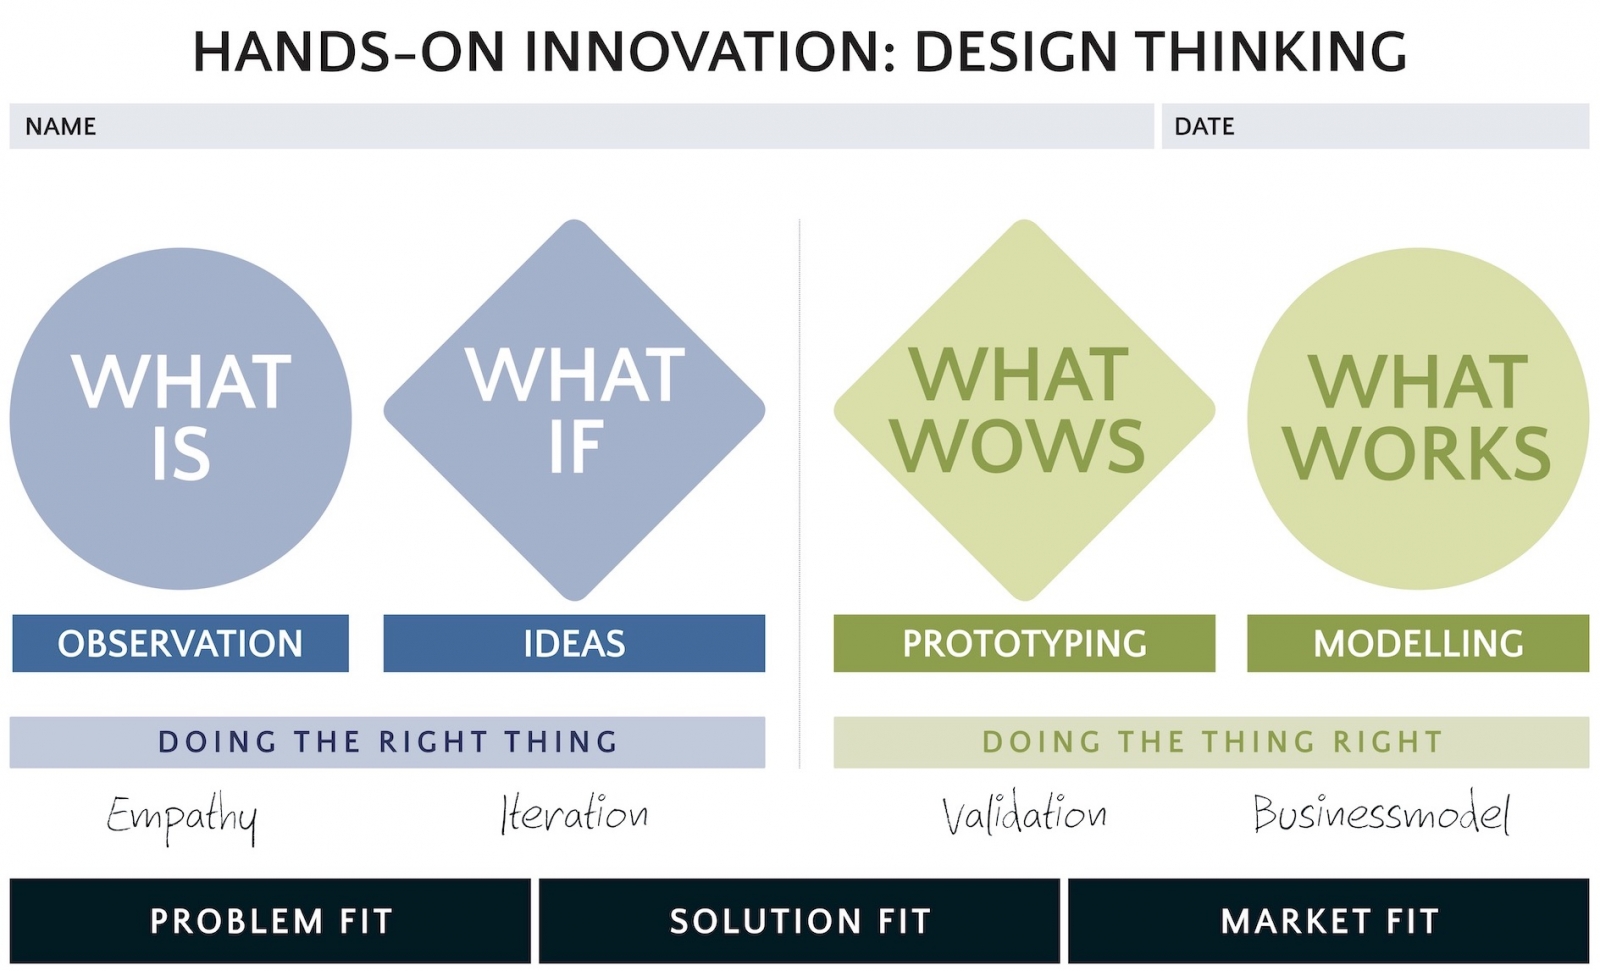 hands-on innovation in four steps